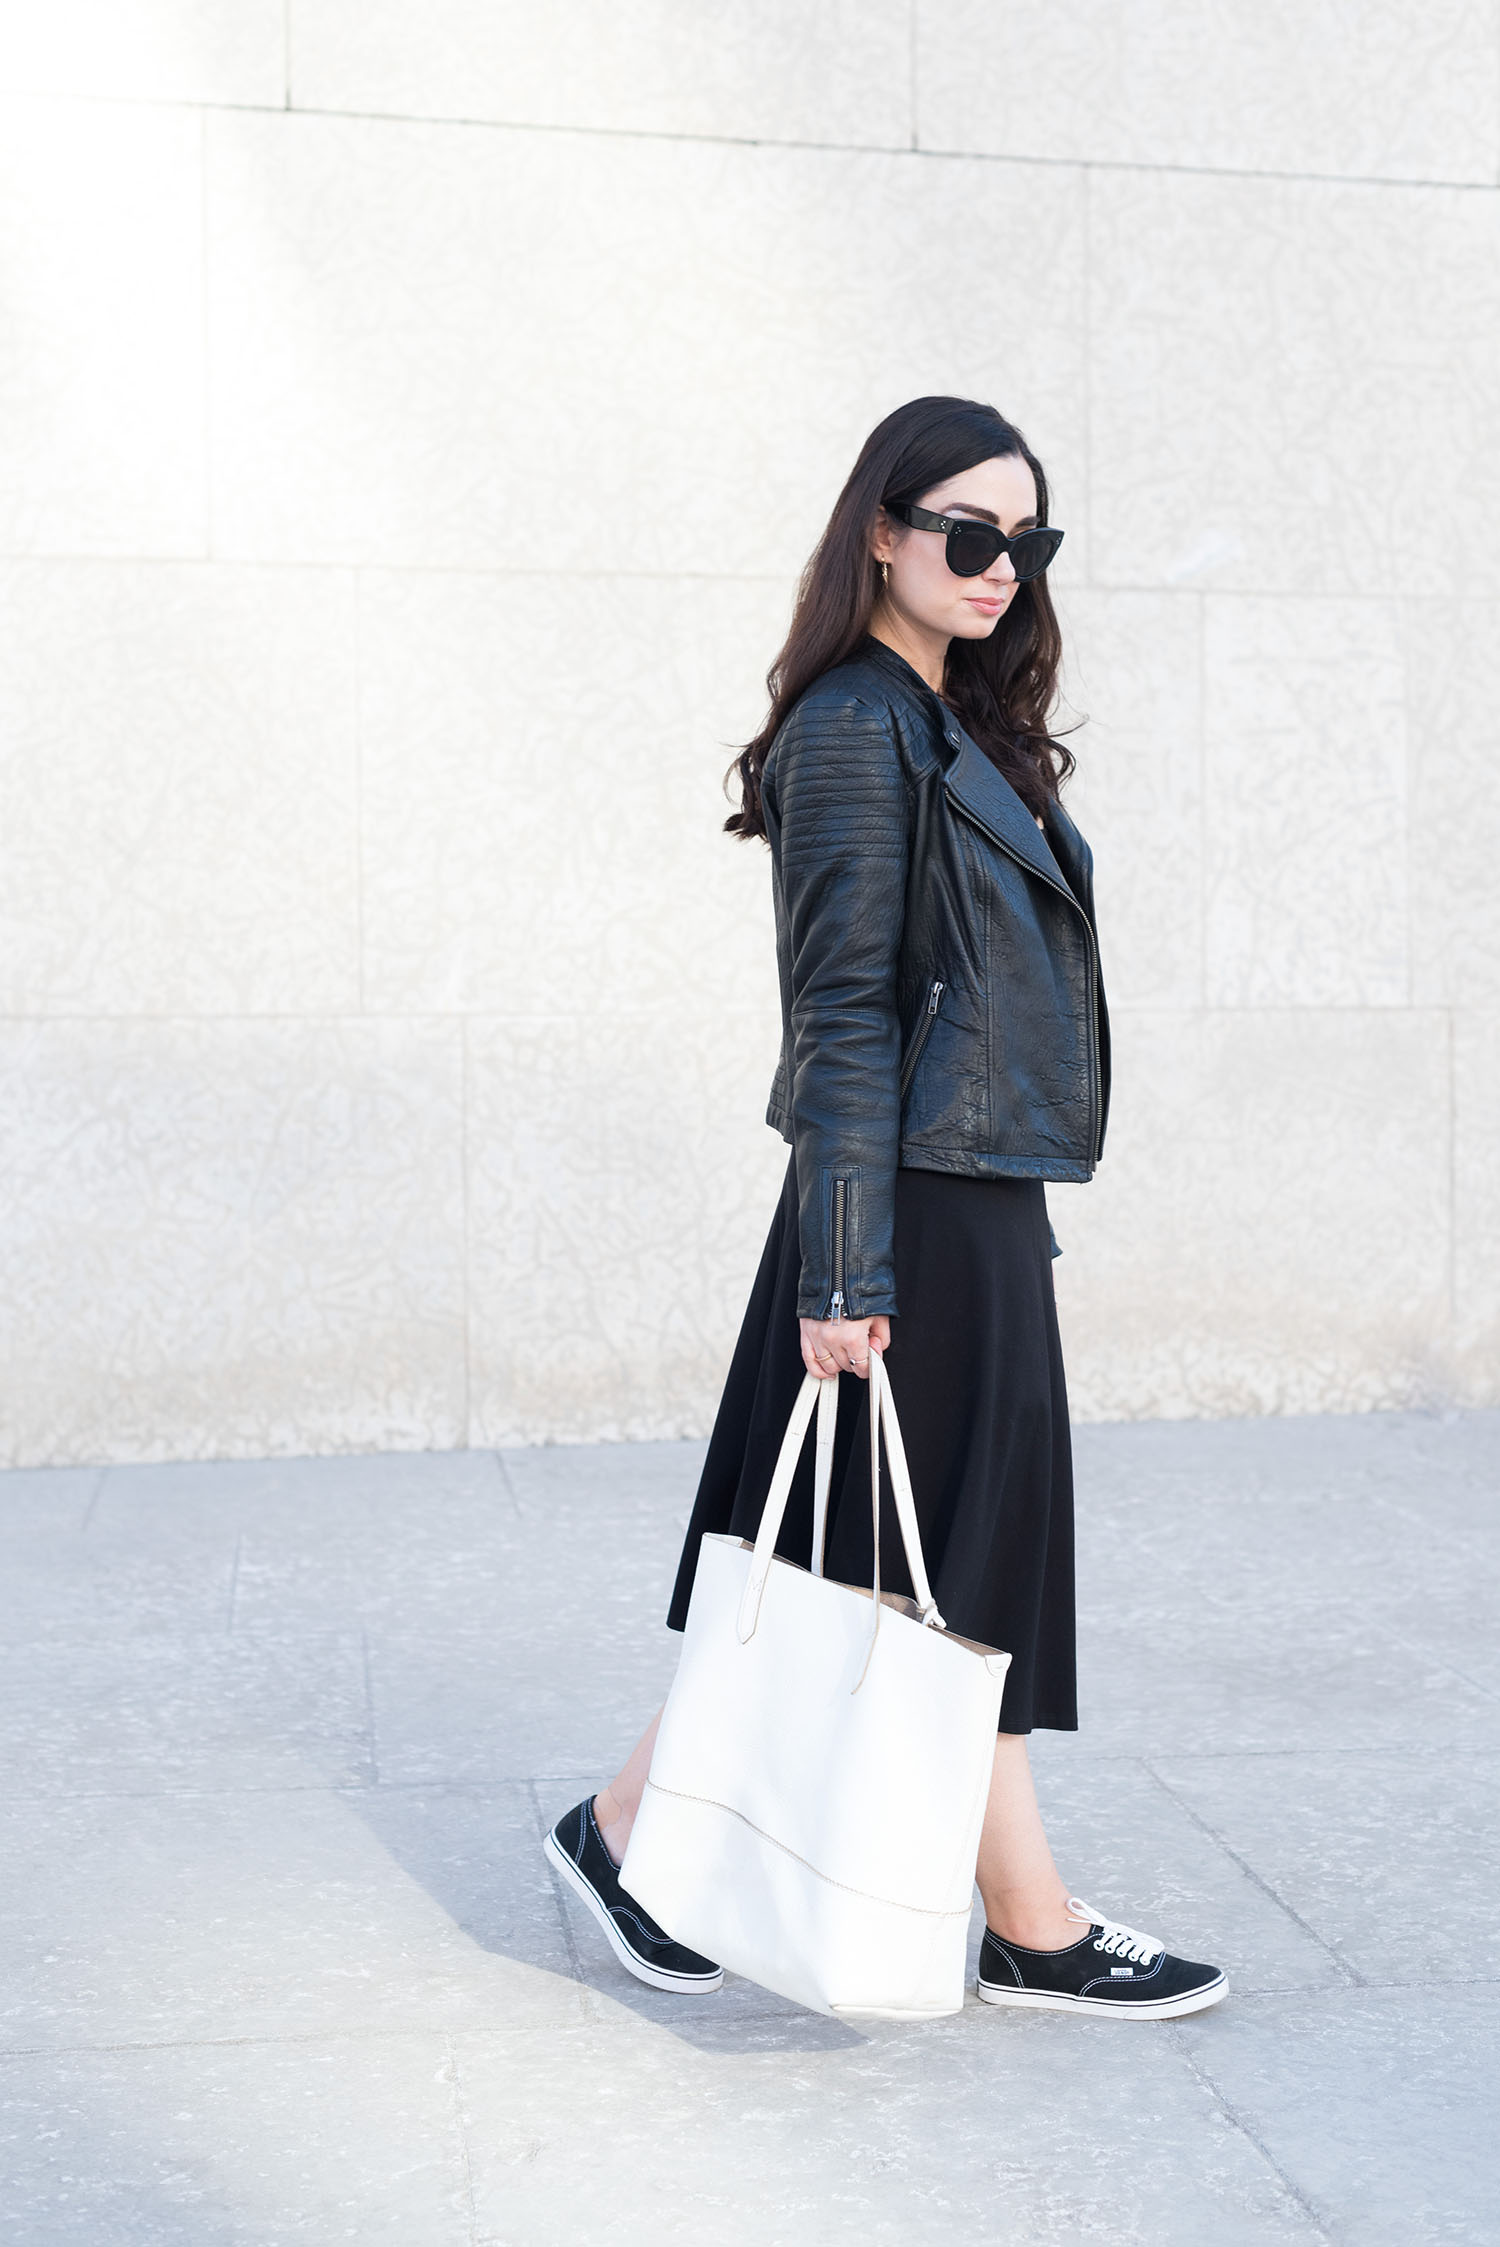 Canadian fashion blogger Cee Fardoe of Coco & Vera walks outside the Winnipeg Art Gallery wearing a black leather jacket and carrying a J. Crew white tote